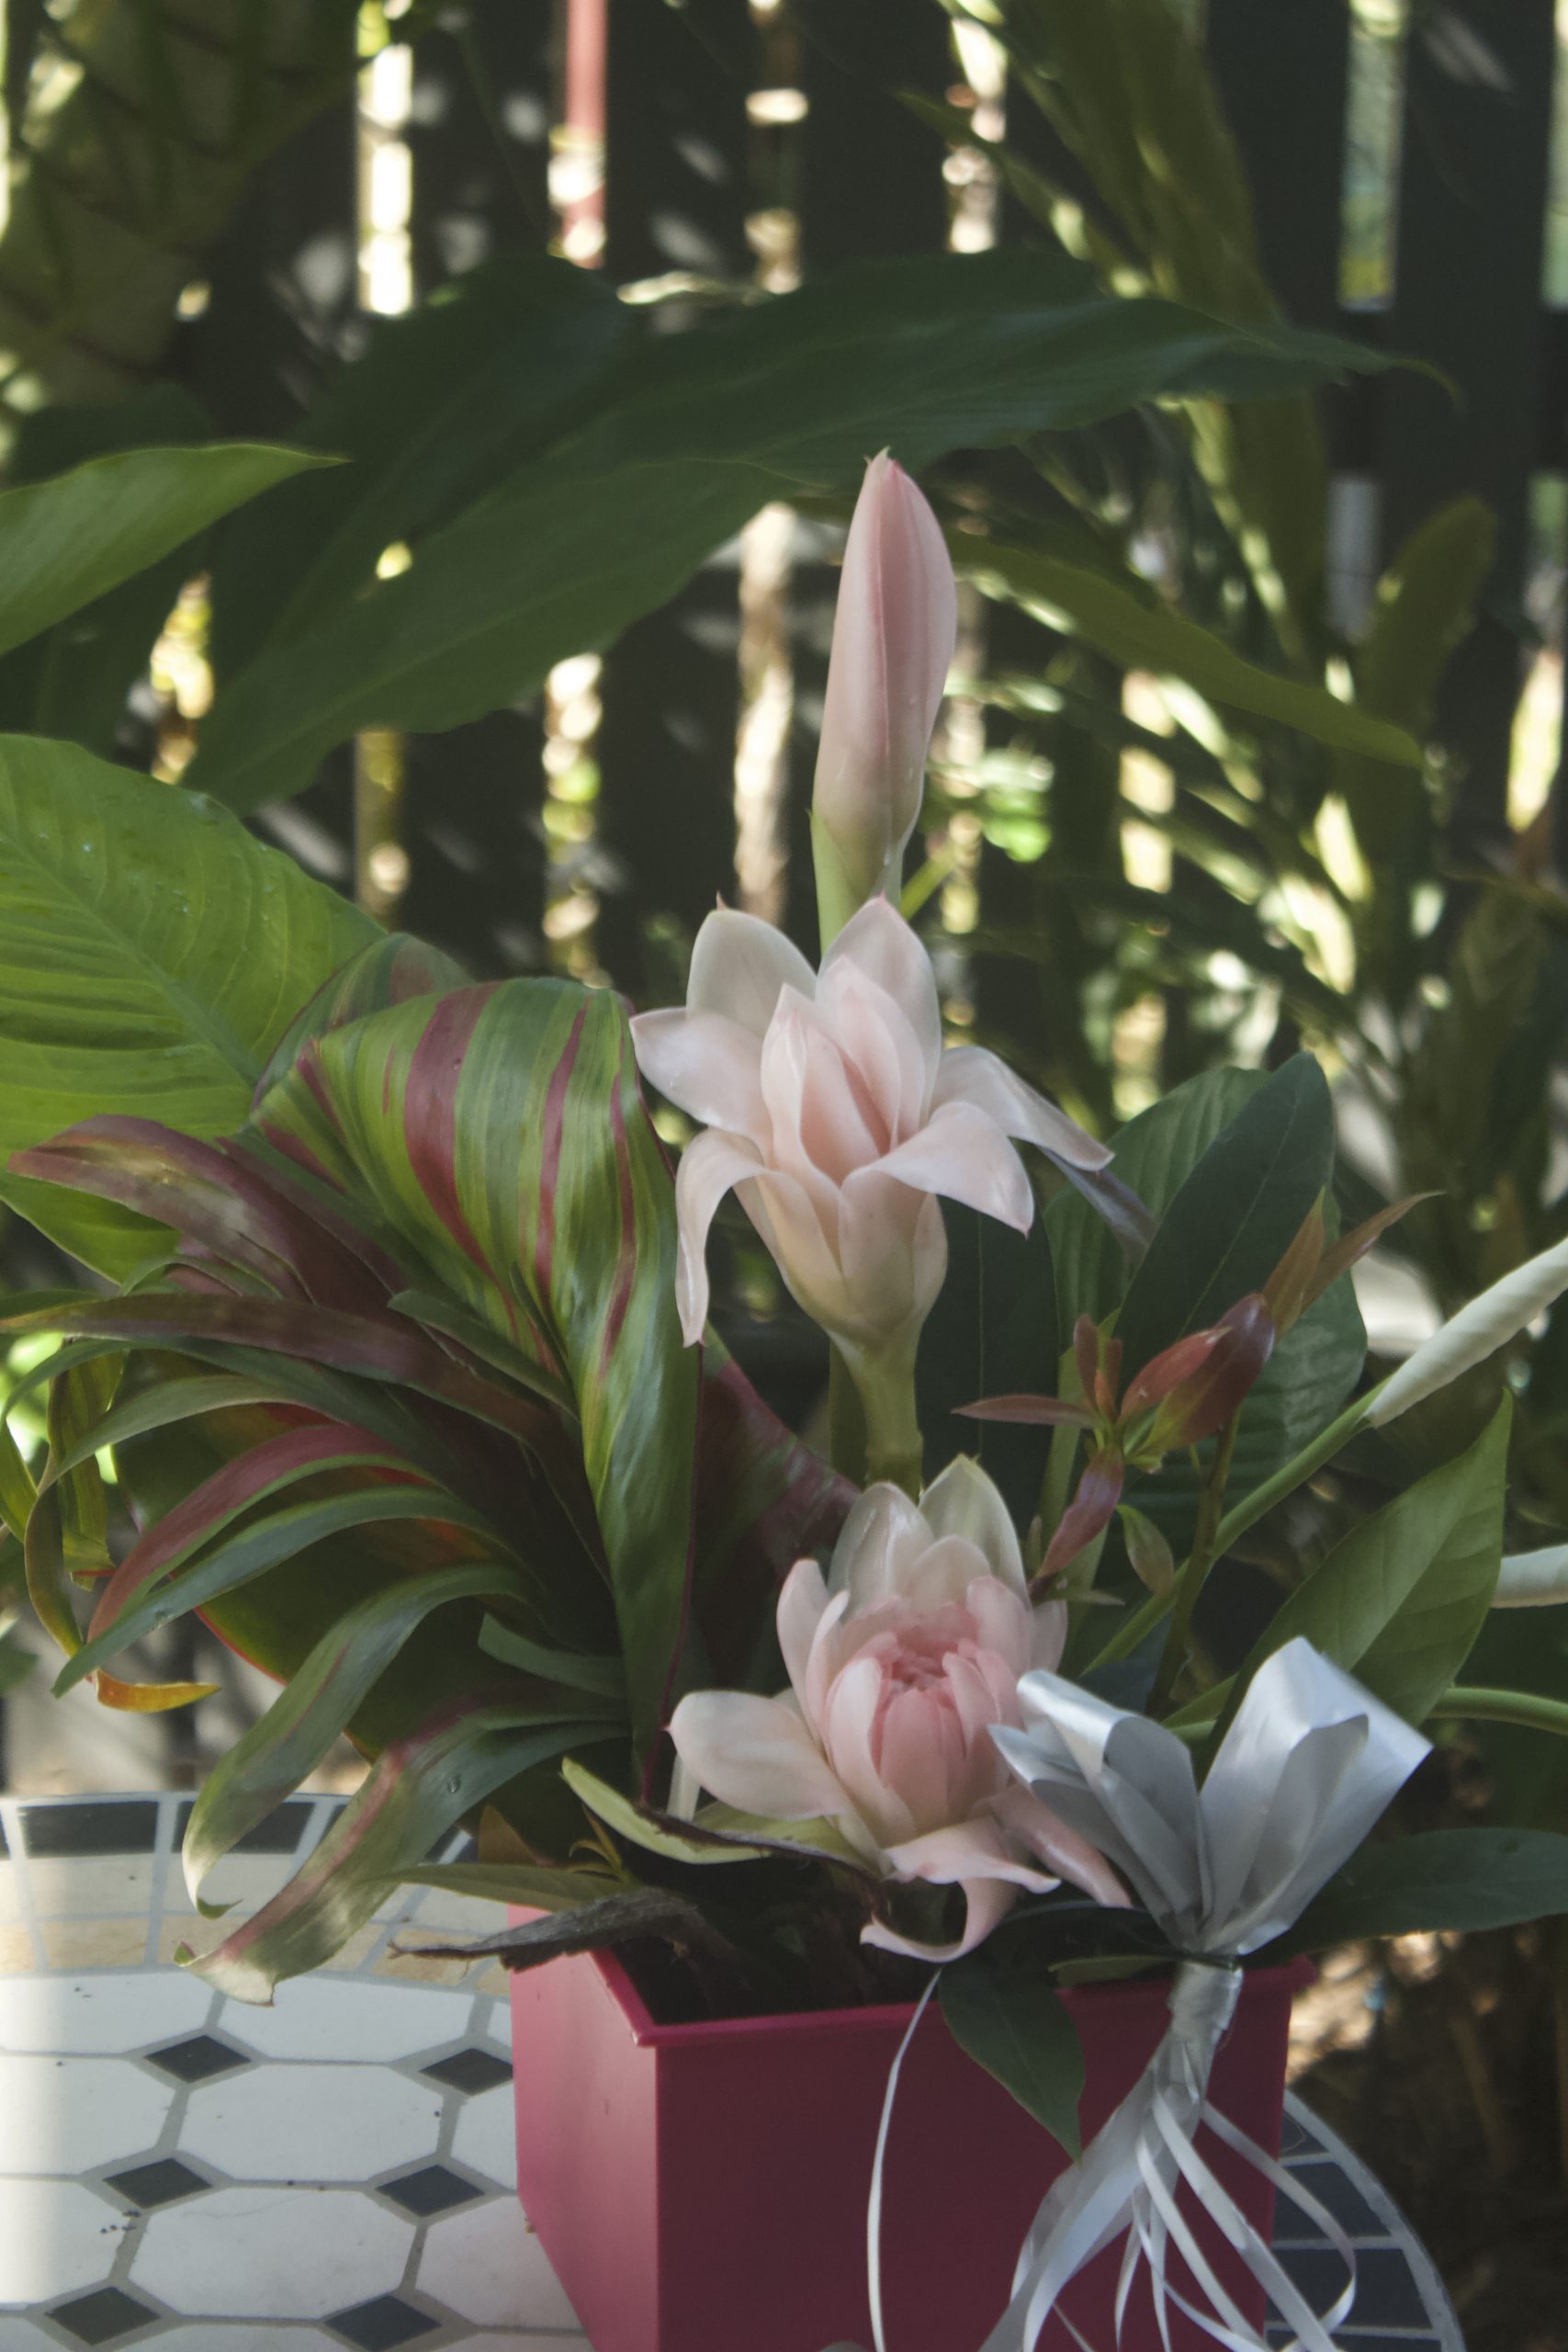 Penda leaves, peace lilly flowers and foliage, willy's gold cordy in a fluro pink container